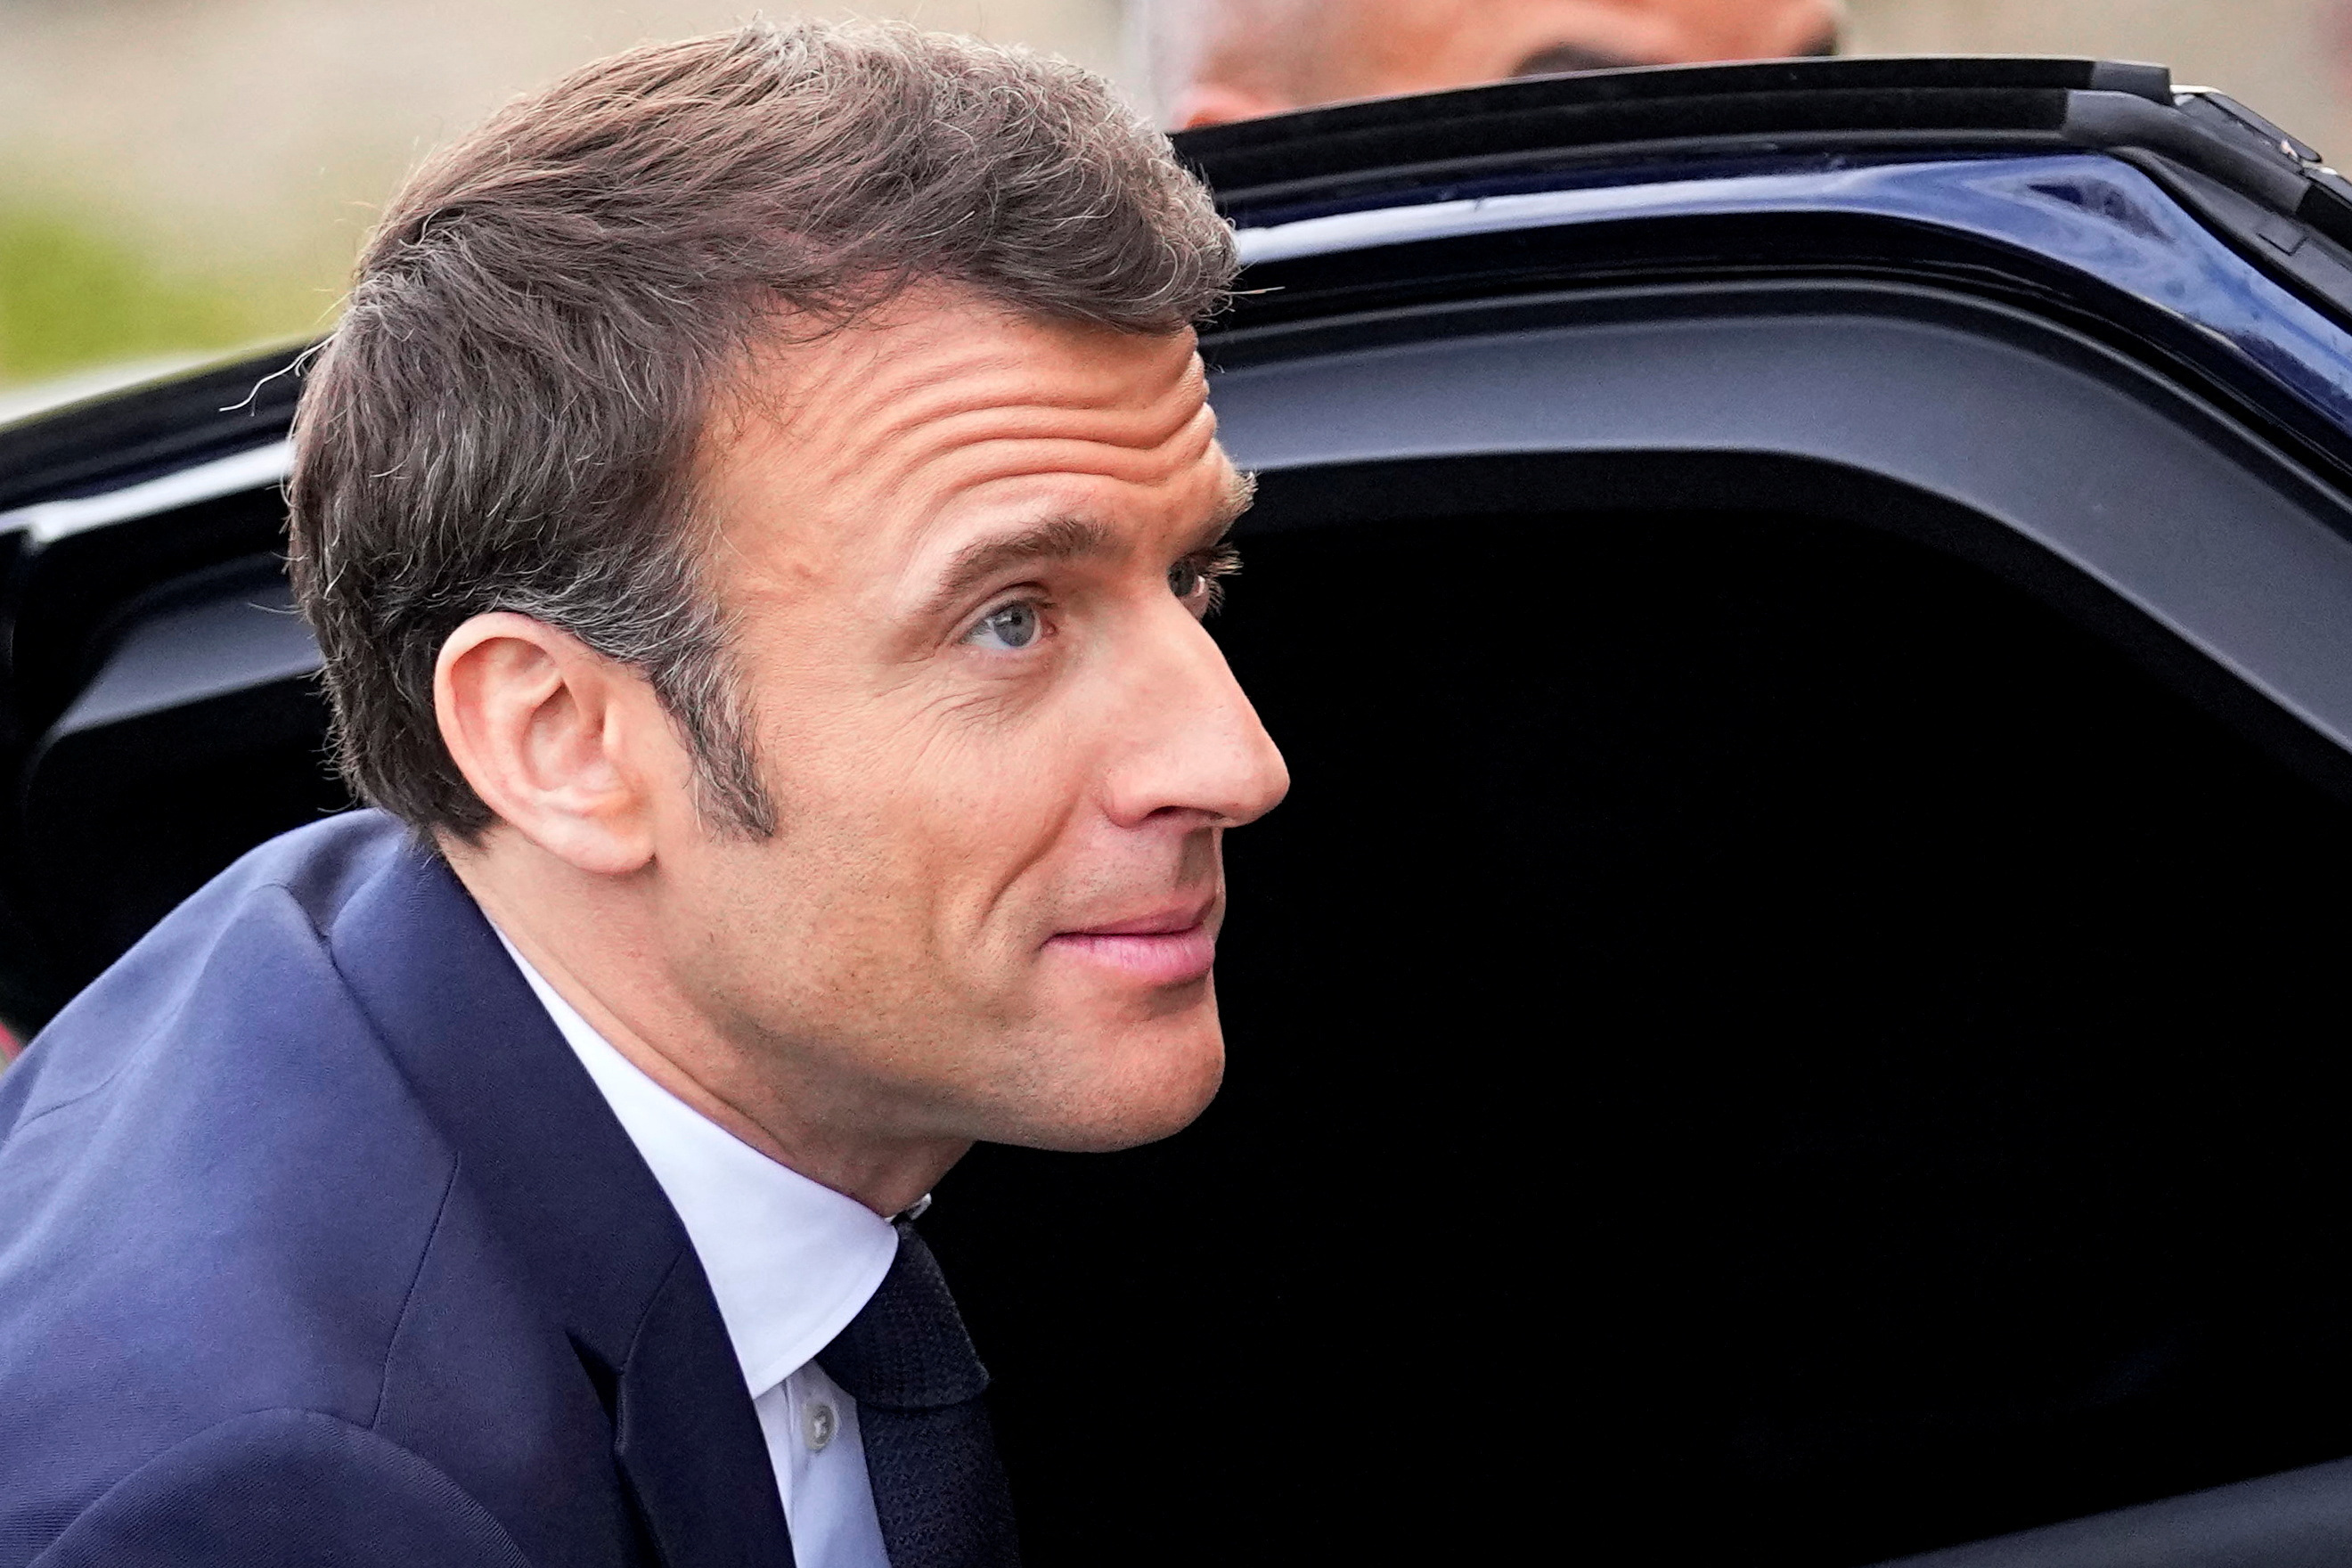 French President Macron attends the National Roundtable on Diplomacy in Paris